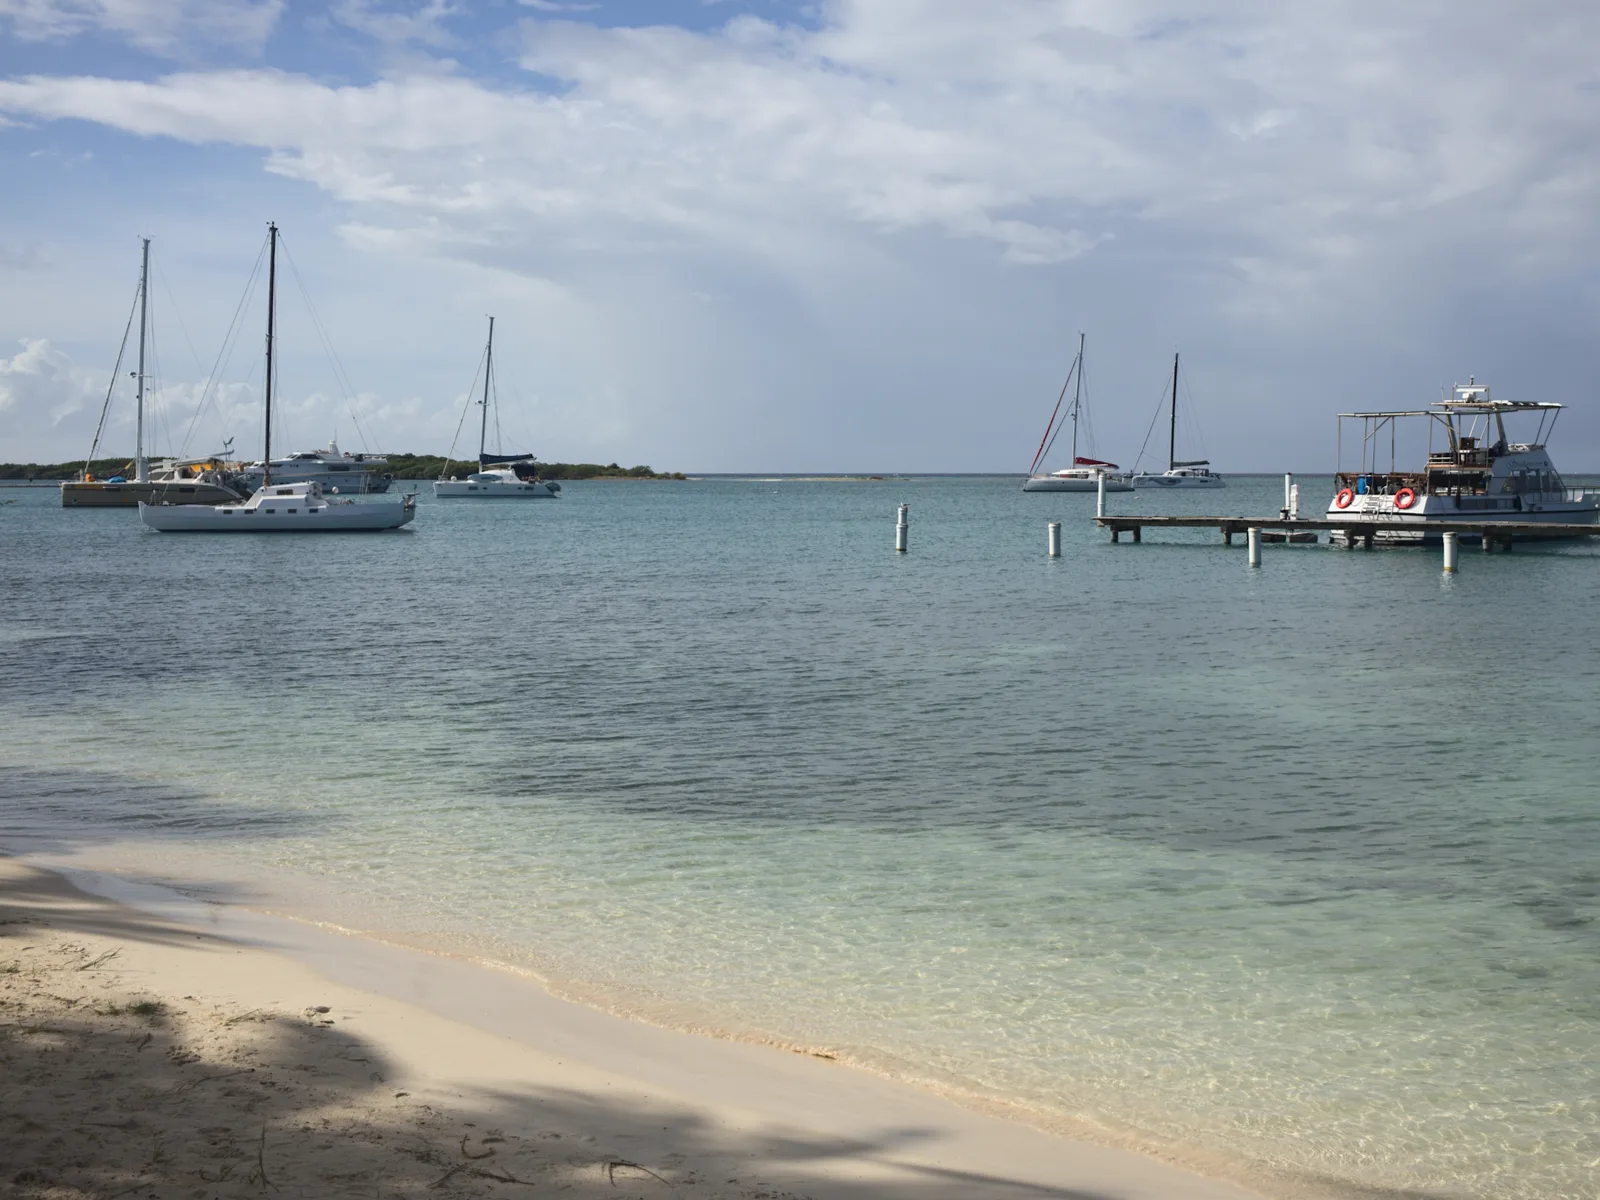 Several boats anchored and docked near the shore of Surfside Beach, one of the best beaches in Aruba, on a calm and cloudy weather